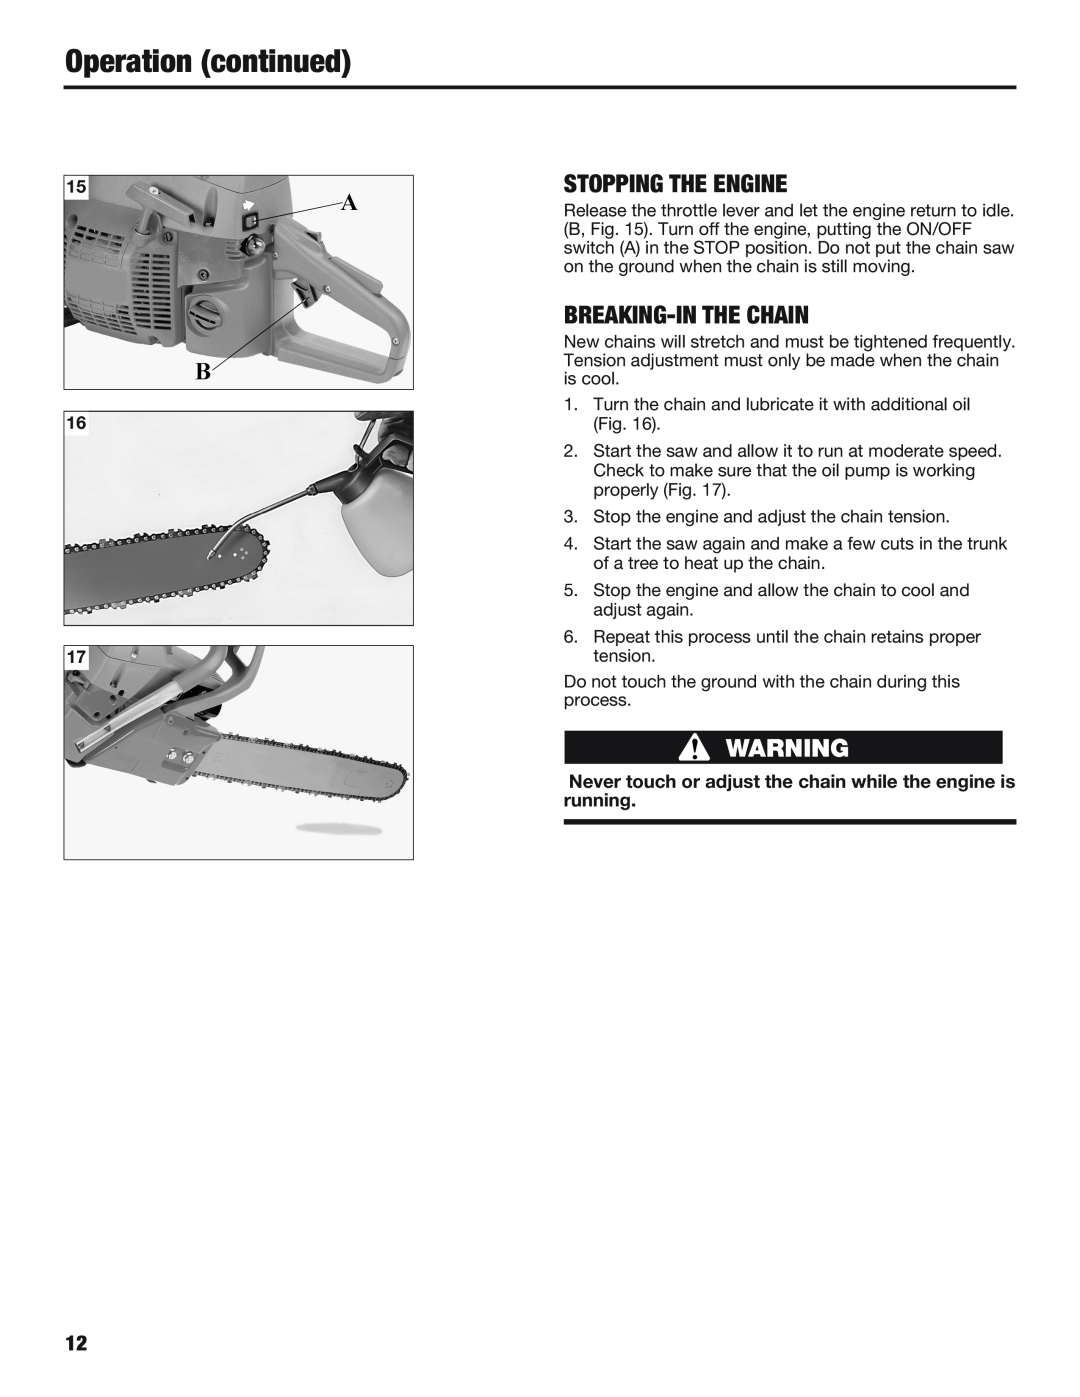 Cub Cadet CS5720 manual Operation continued, Stopping The Engine, Breaking-Inthe Chain 